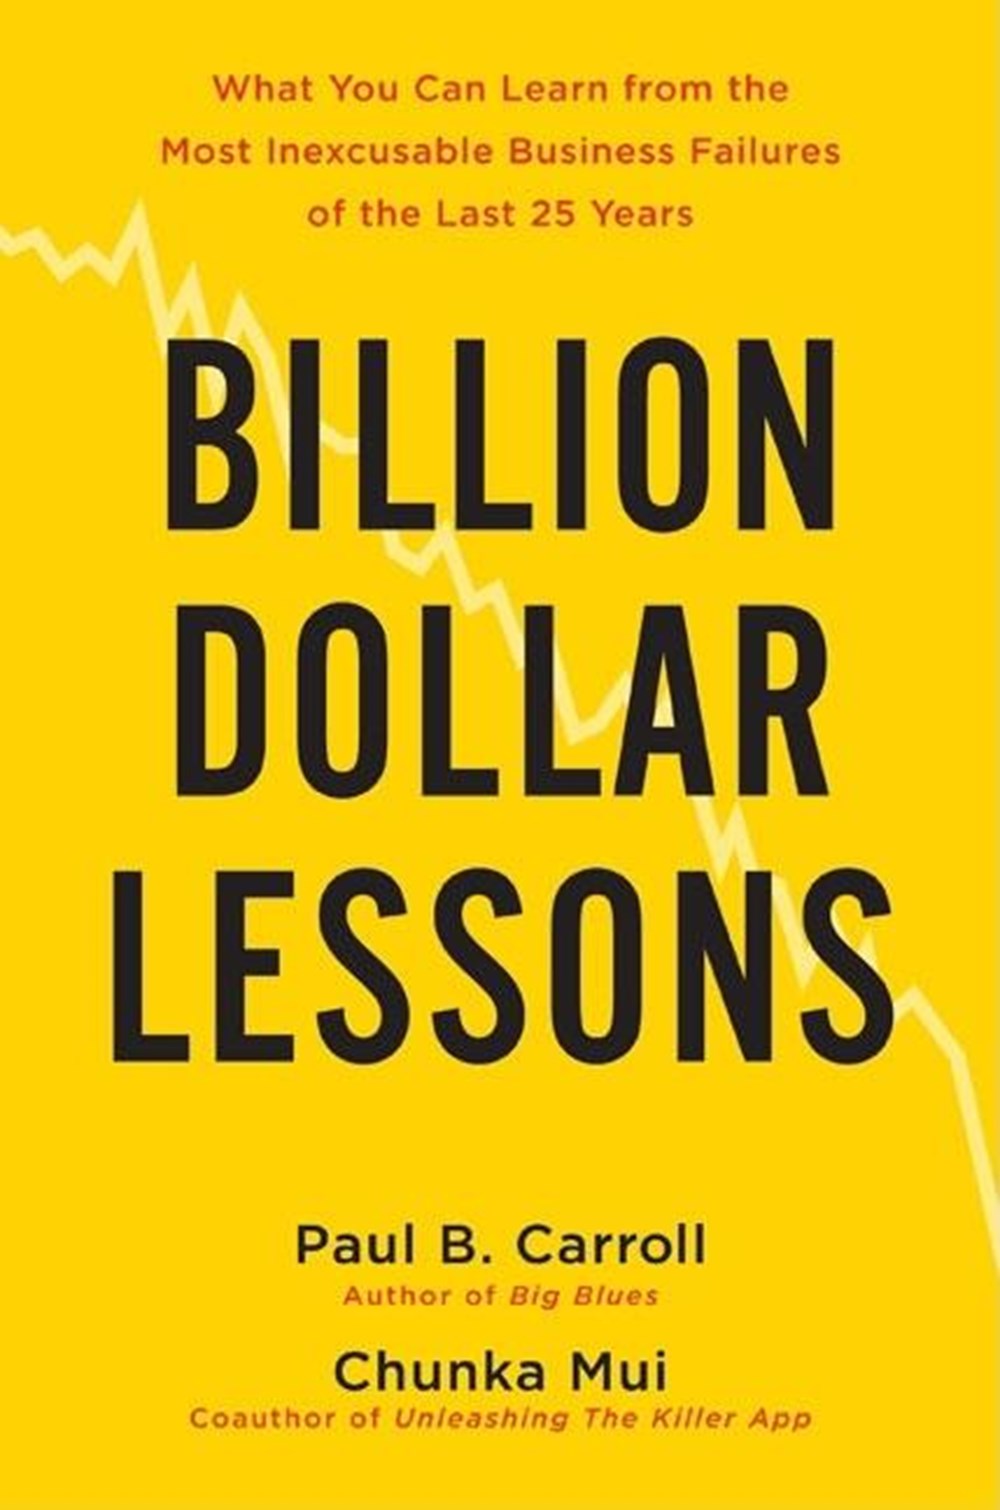 Billion Dollar Lessons: What You Can Learn from the Most Inexcusable Business Failures of the Last 2